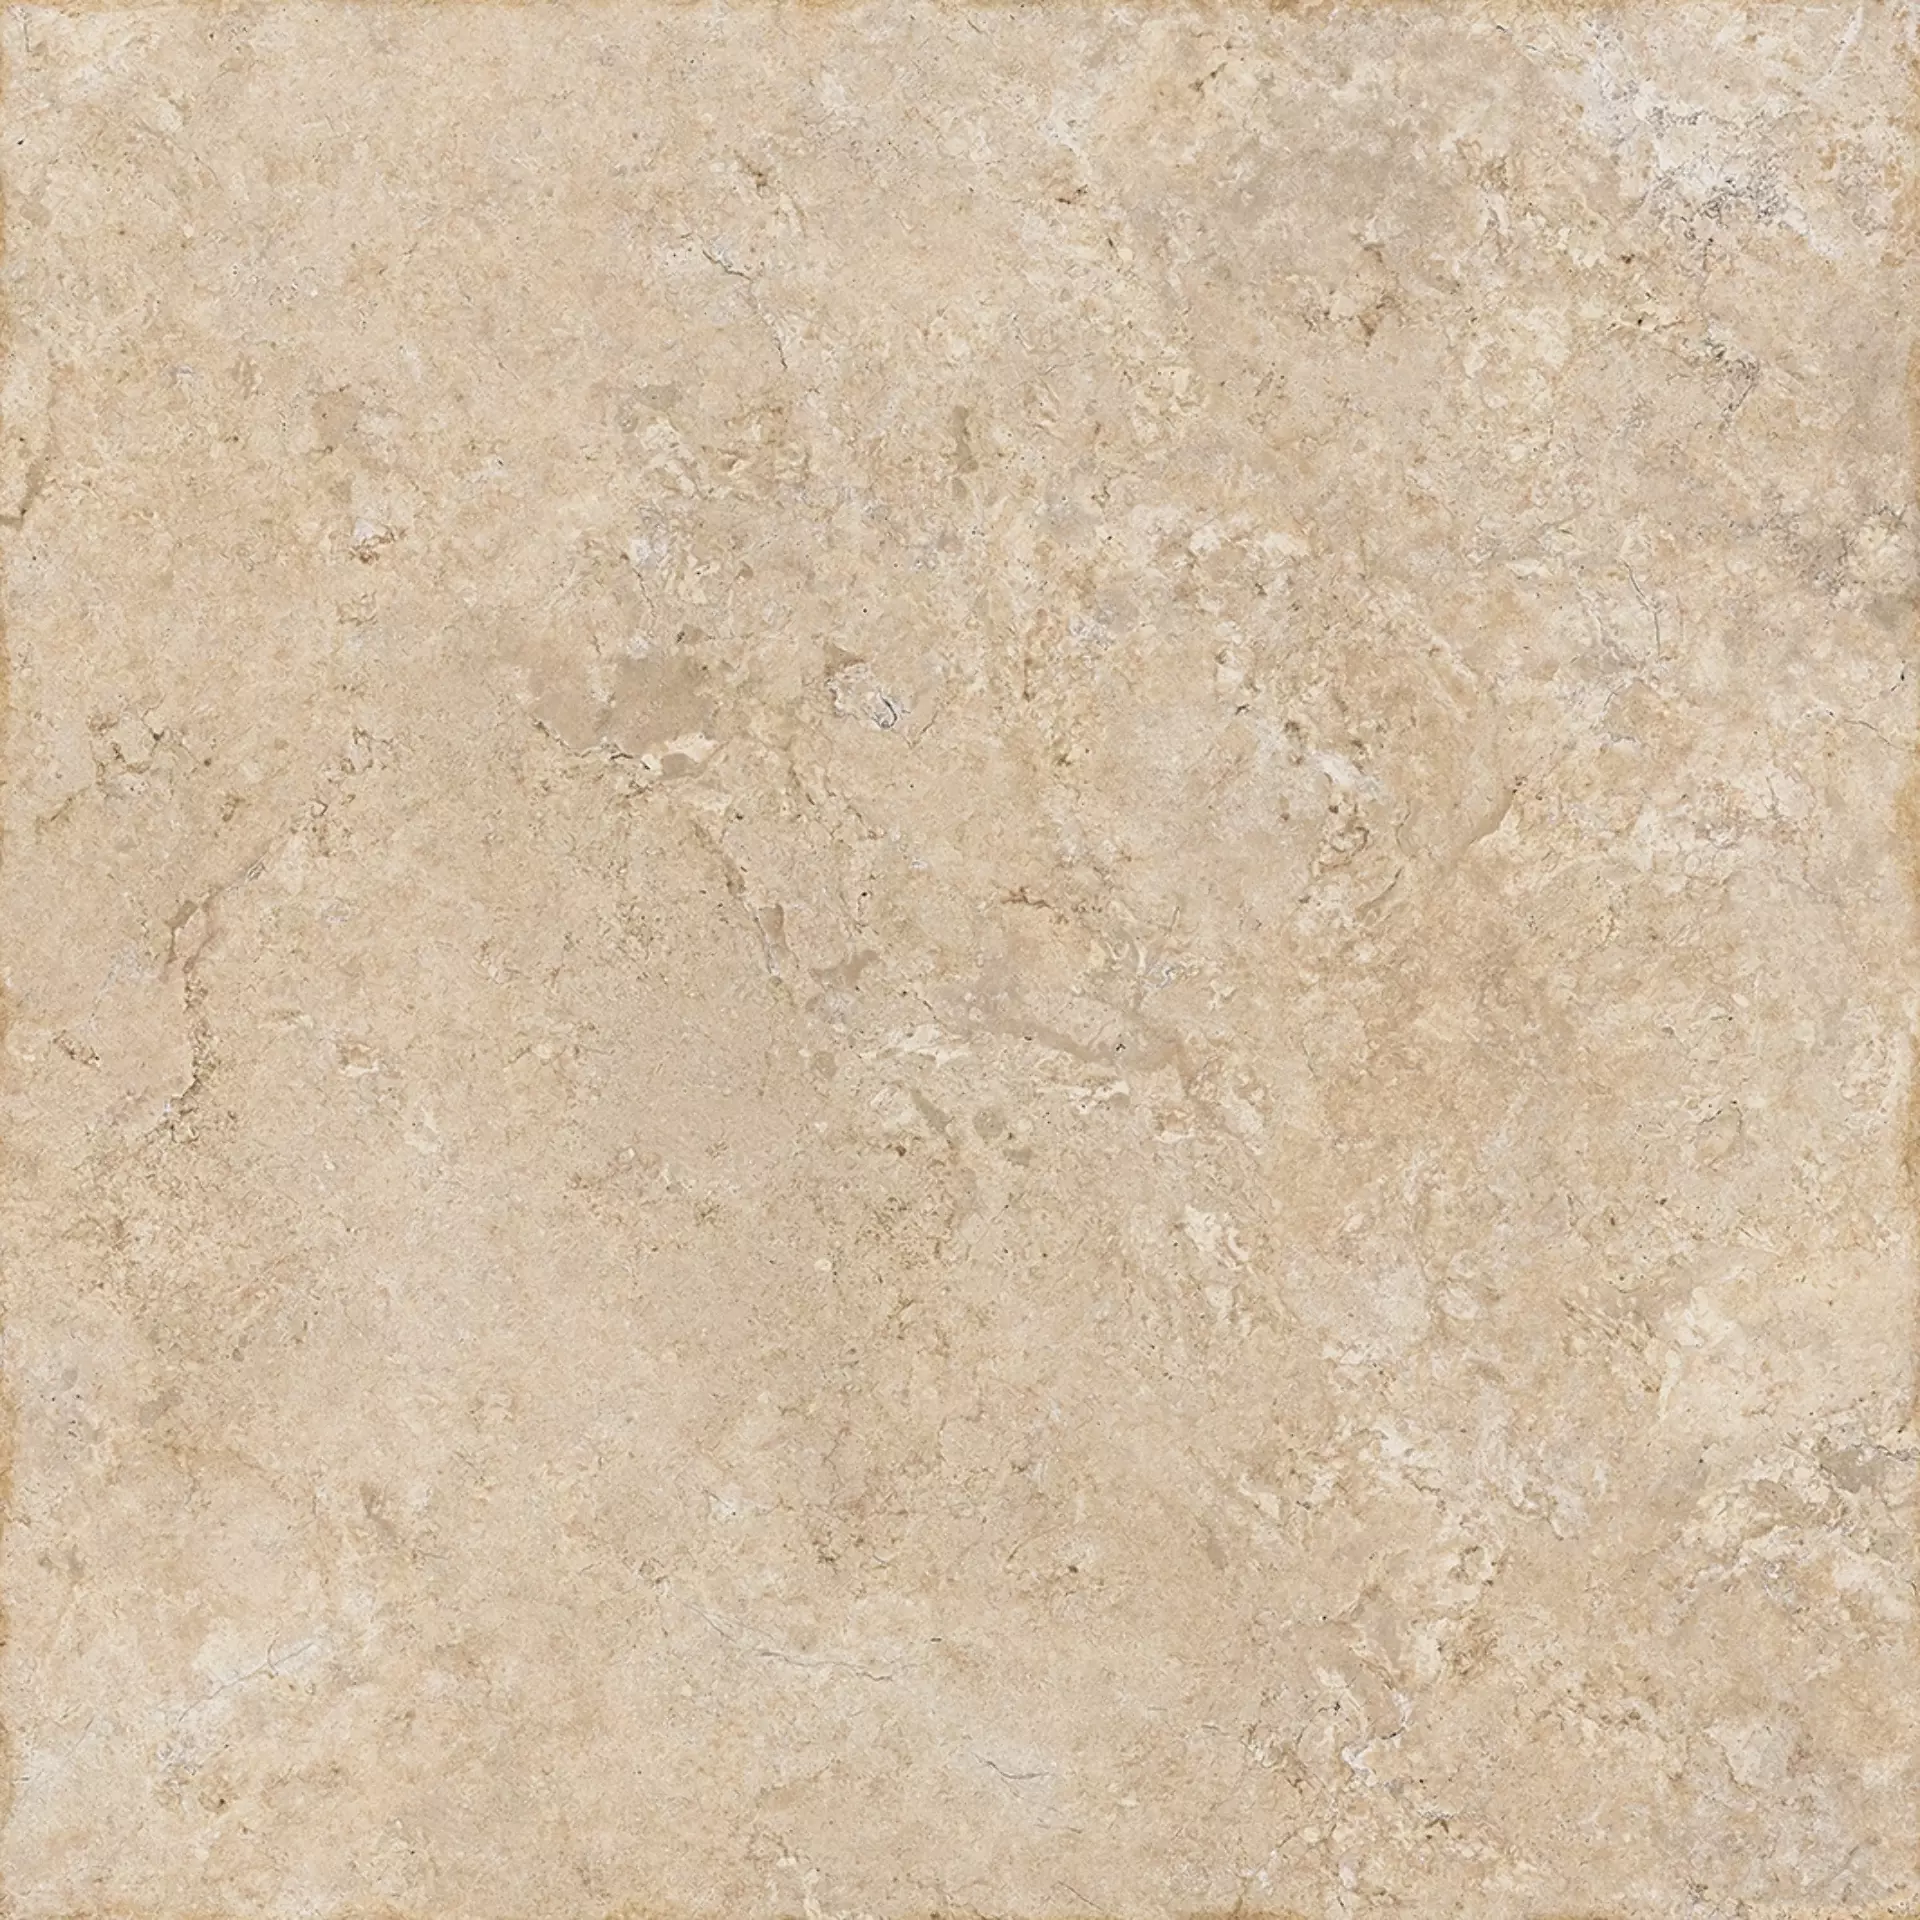 Sichenia Amboise Oro Smooth Chipped Edge 0193245 90x90cm rectified 10mm